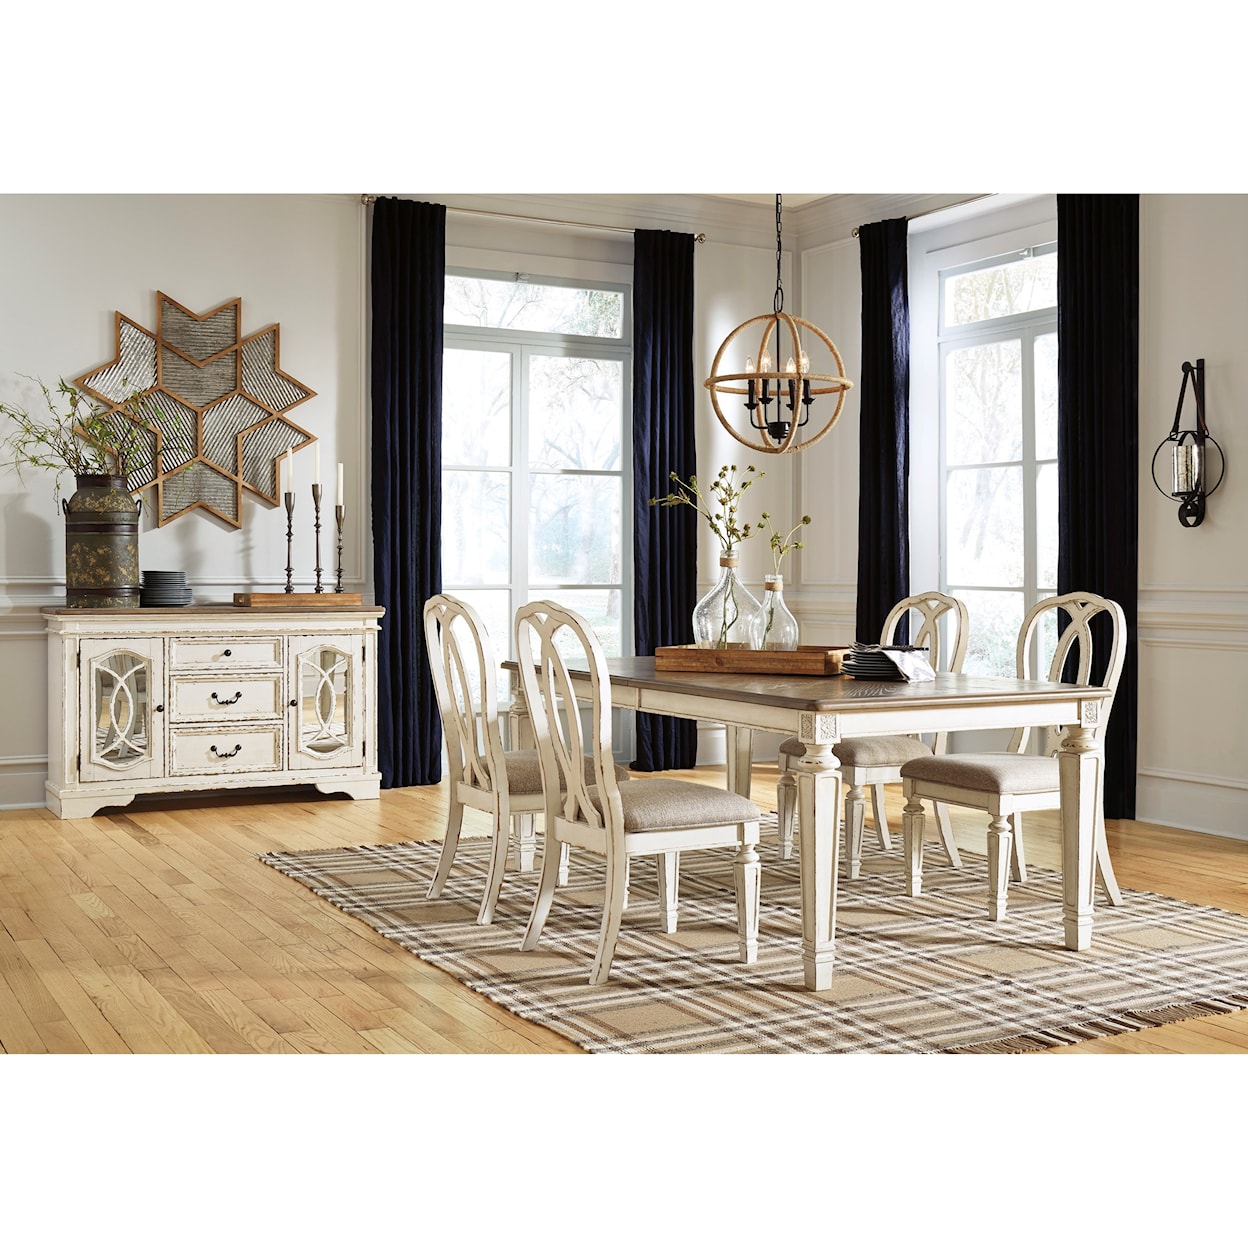 Benchcraft Realyn Casual Dining Room Group